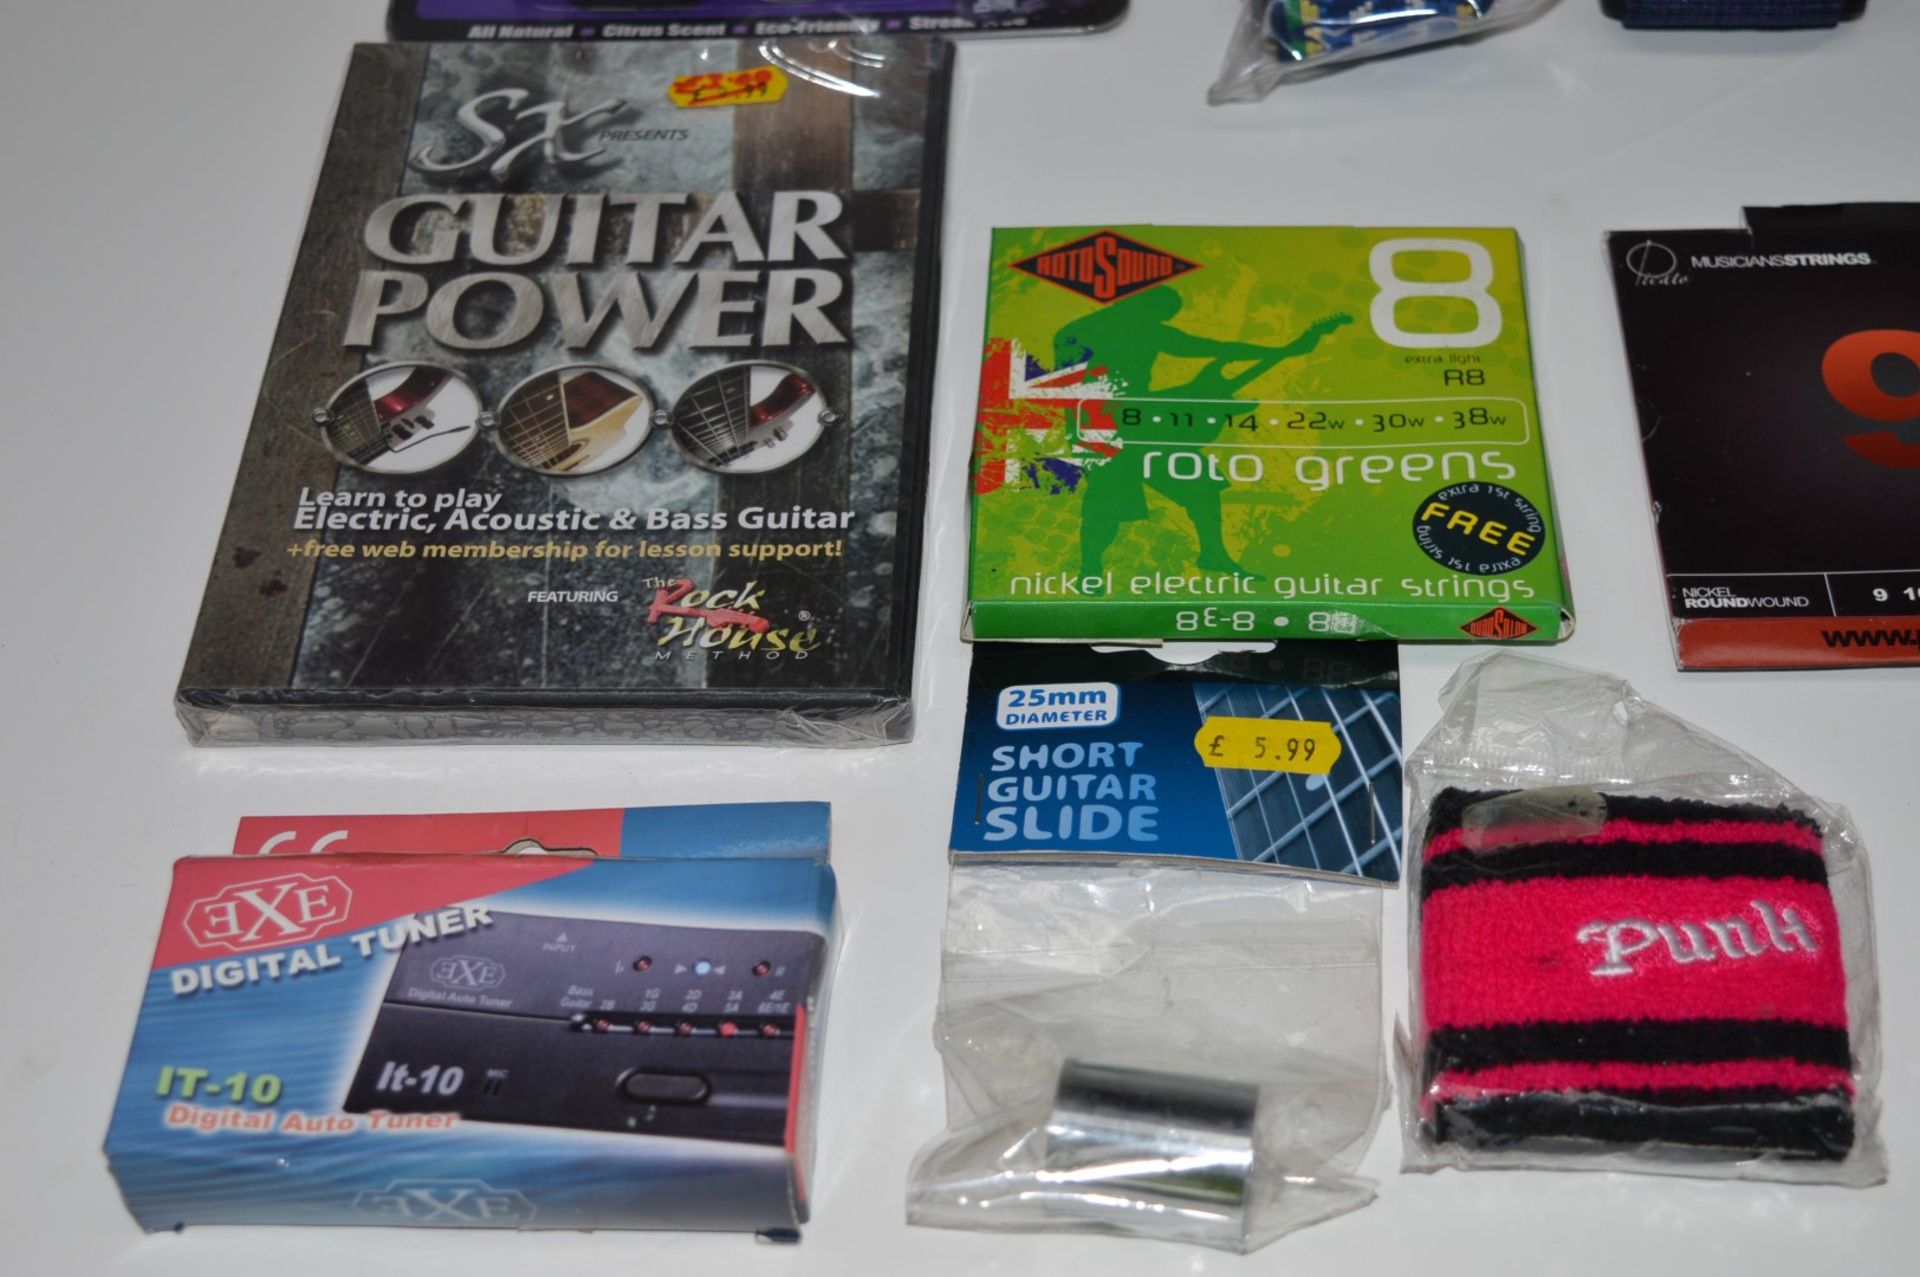 1 x Assorted Collection of Guitar Accessories - Includes Guitar Straps, DVD, Plectrums, Guitar - Image 13 of 13